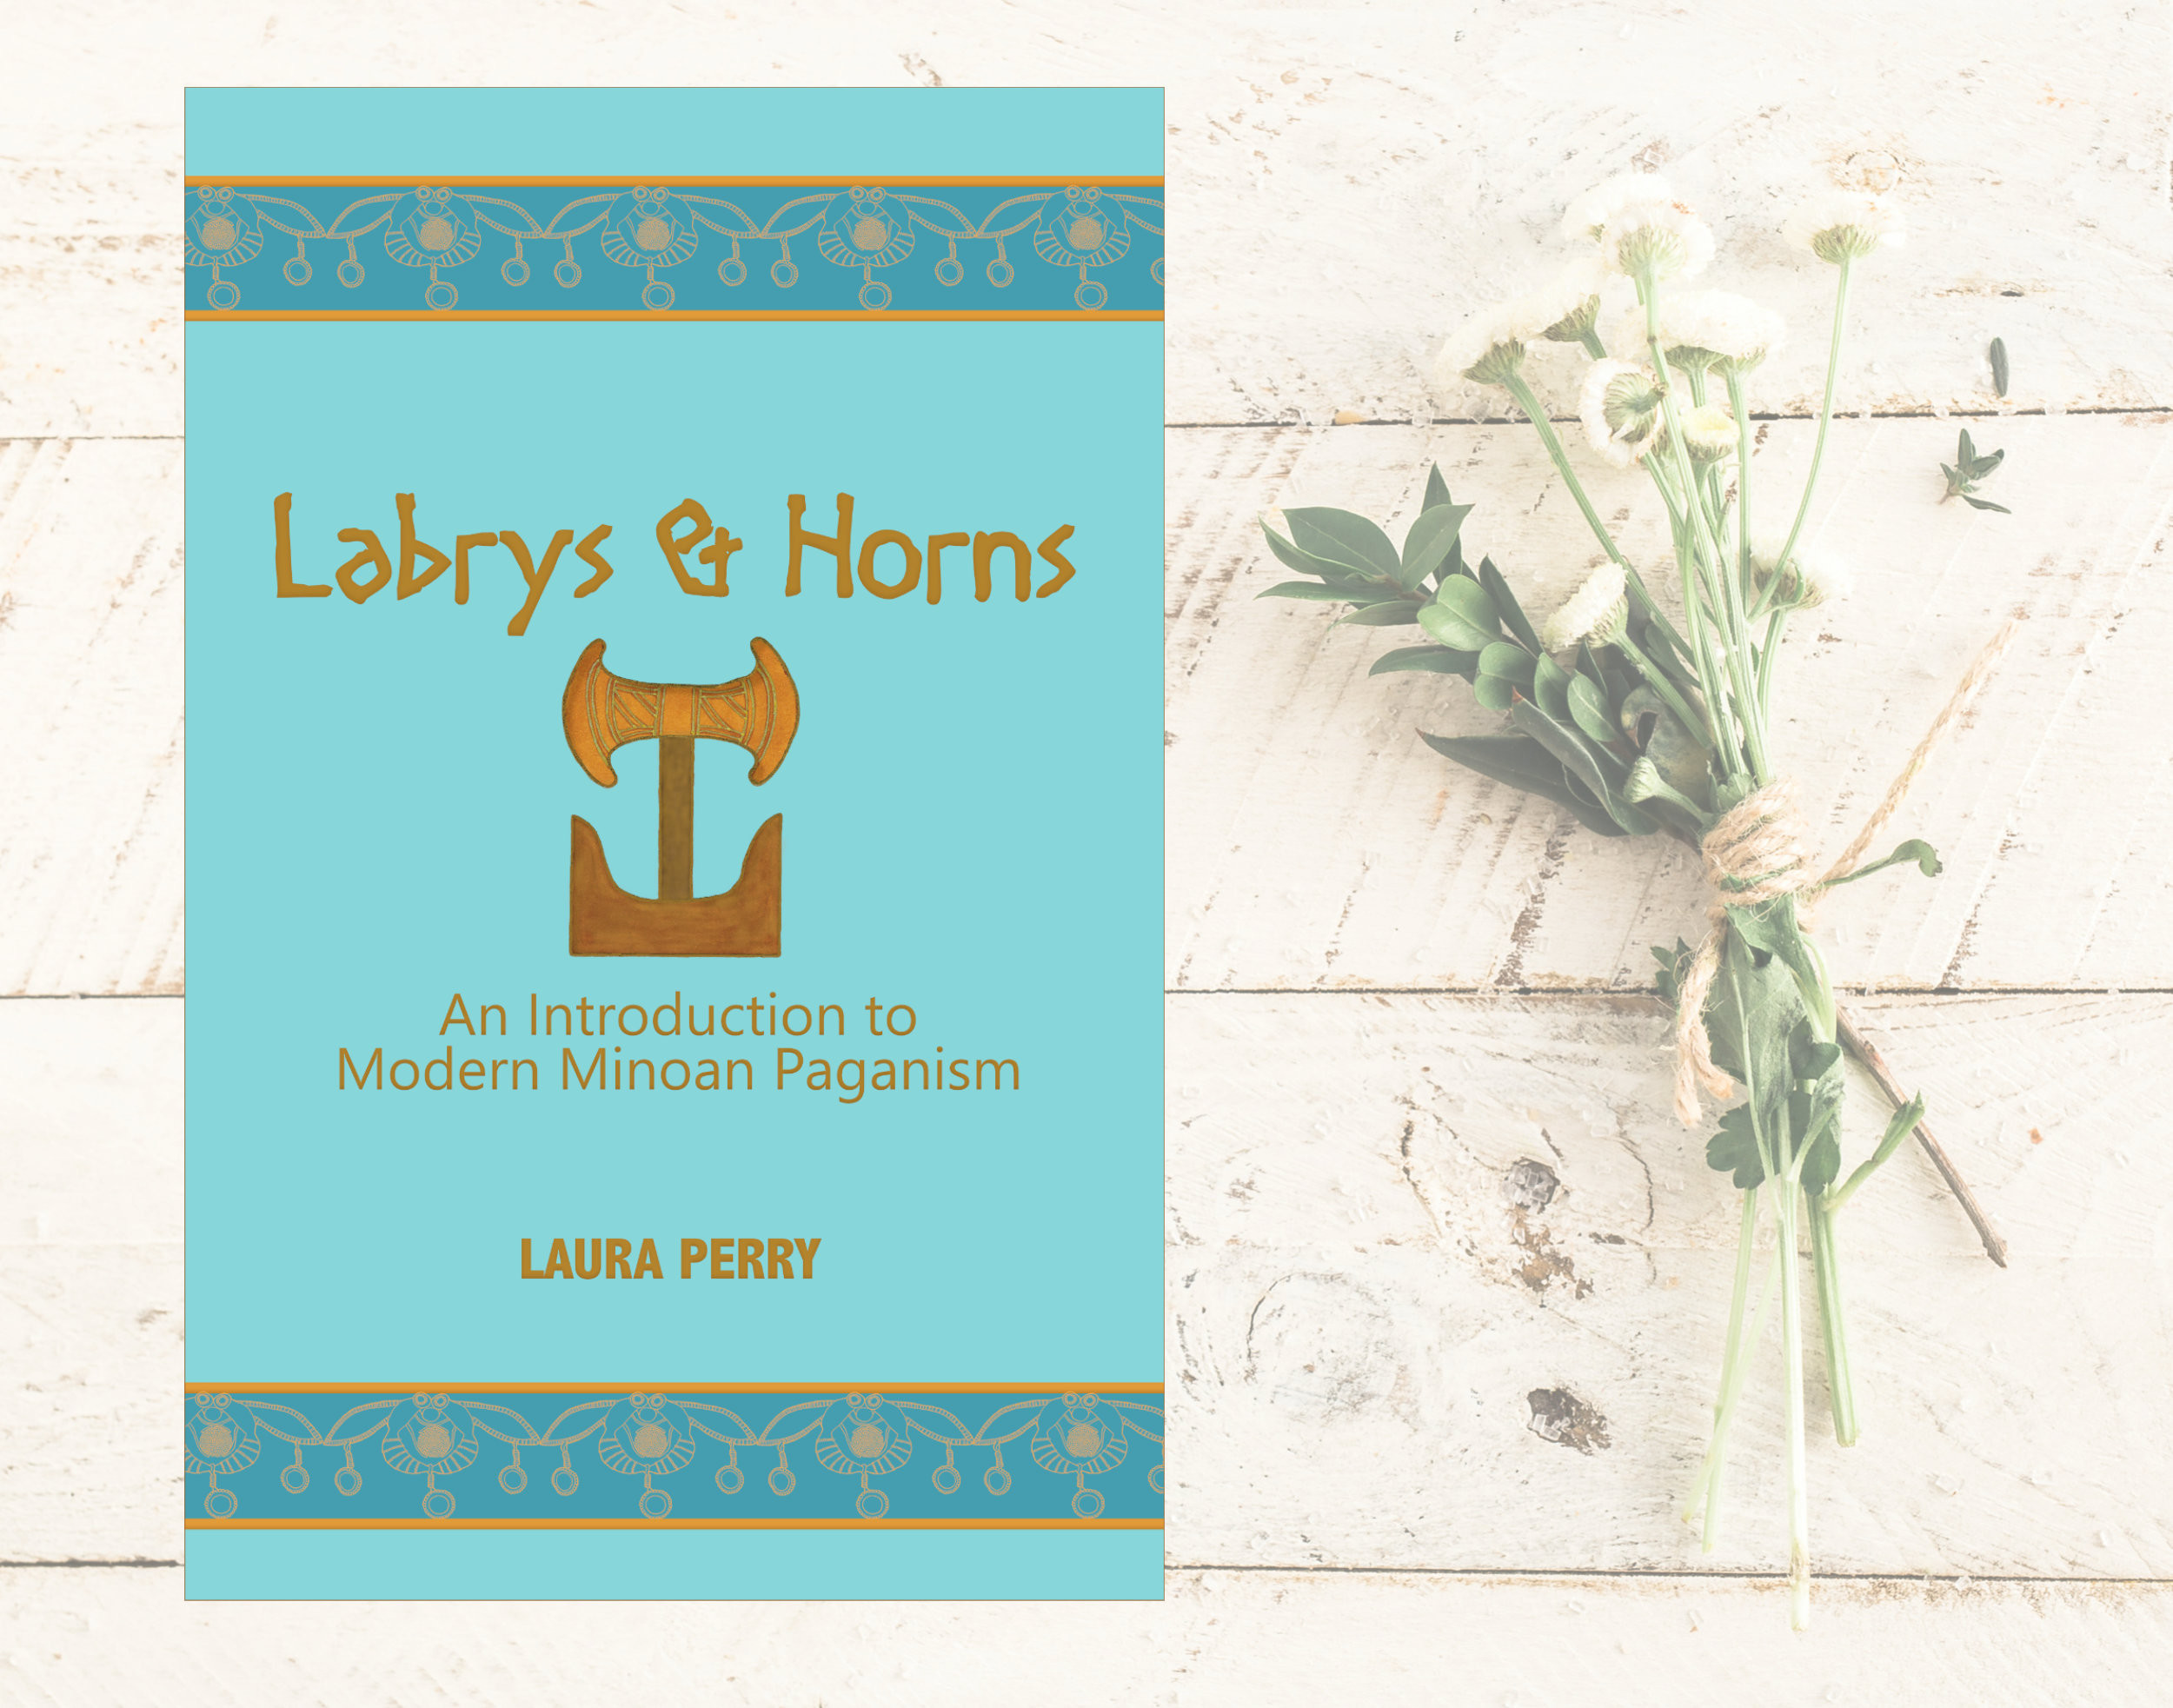 Book cover of Labrys & Horns: An Introduction to Modern Minoan Paganism by Laura Perry, on a white-painted wood background with a bundle of herbs next to it.